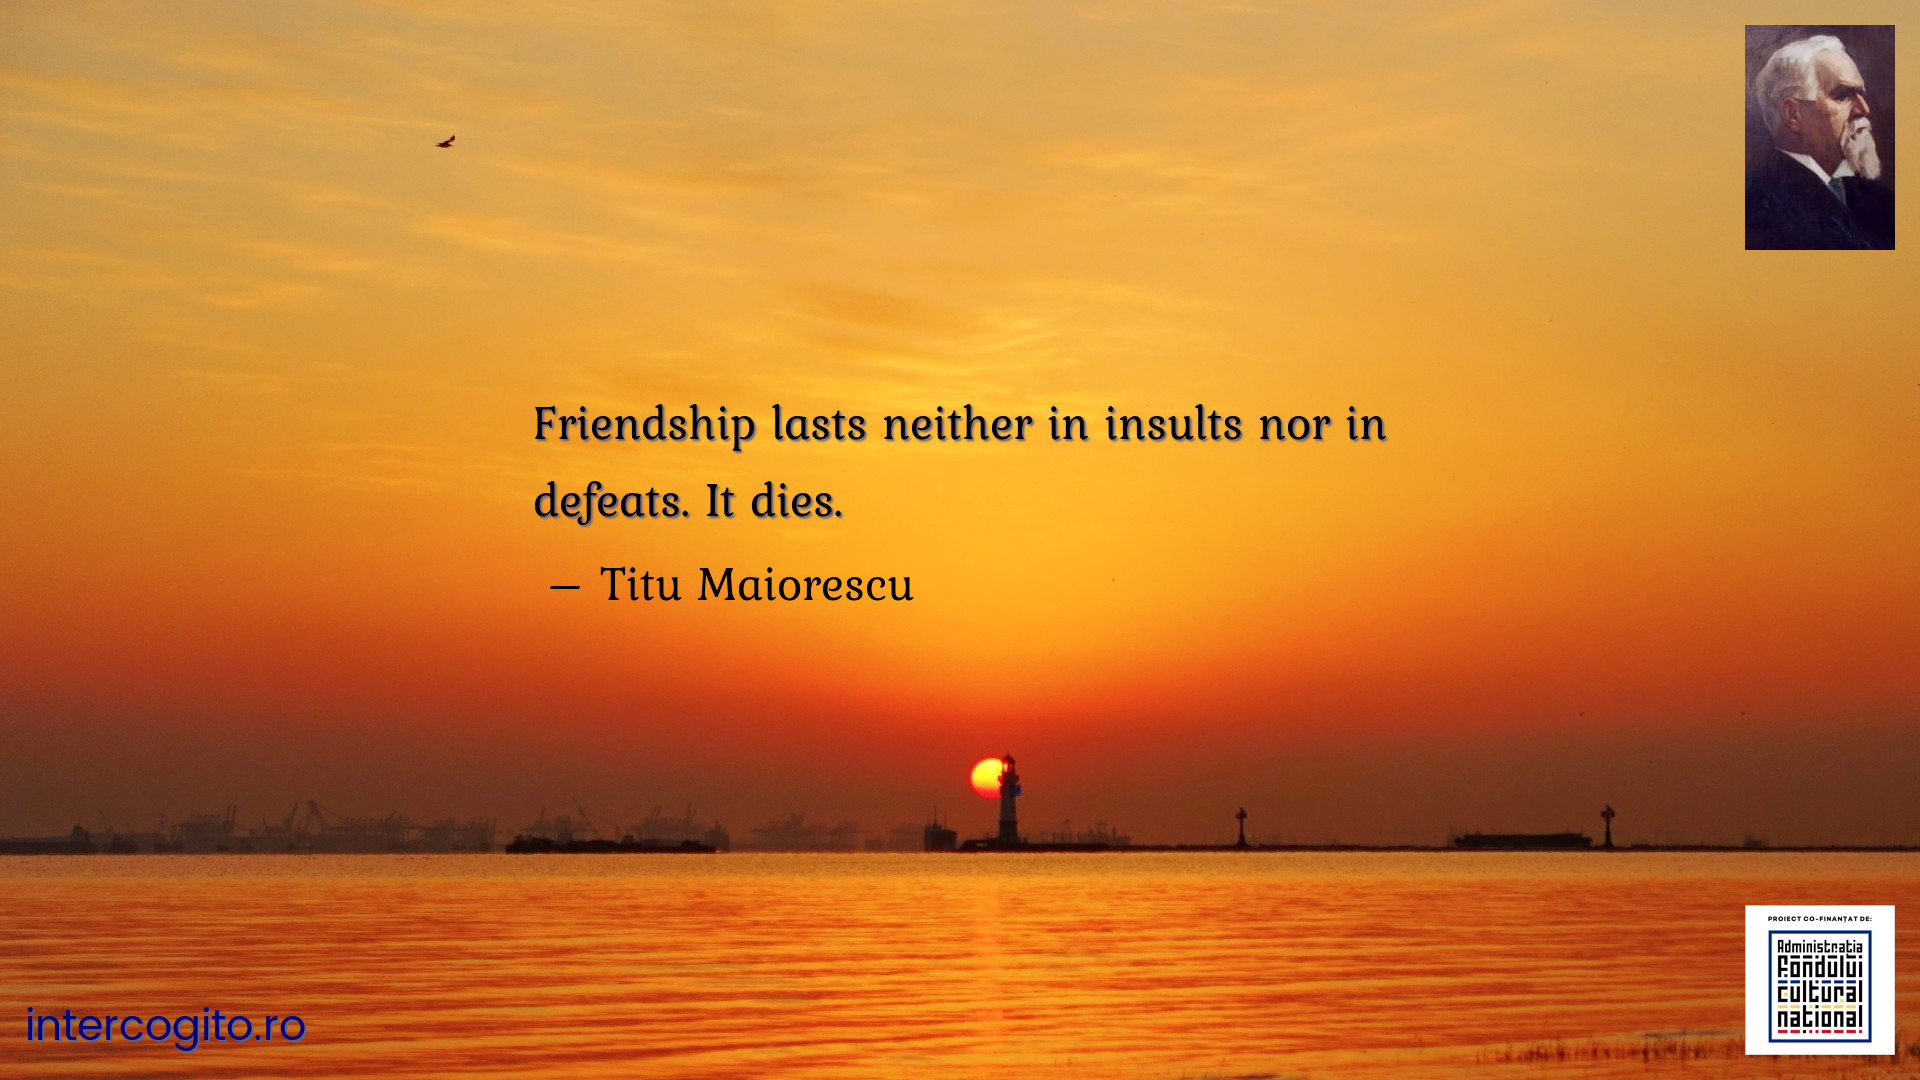 Friendship lasts neither in insults nor in defeats. It dies.